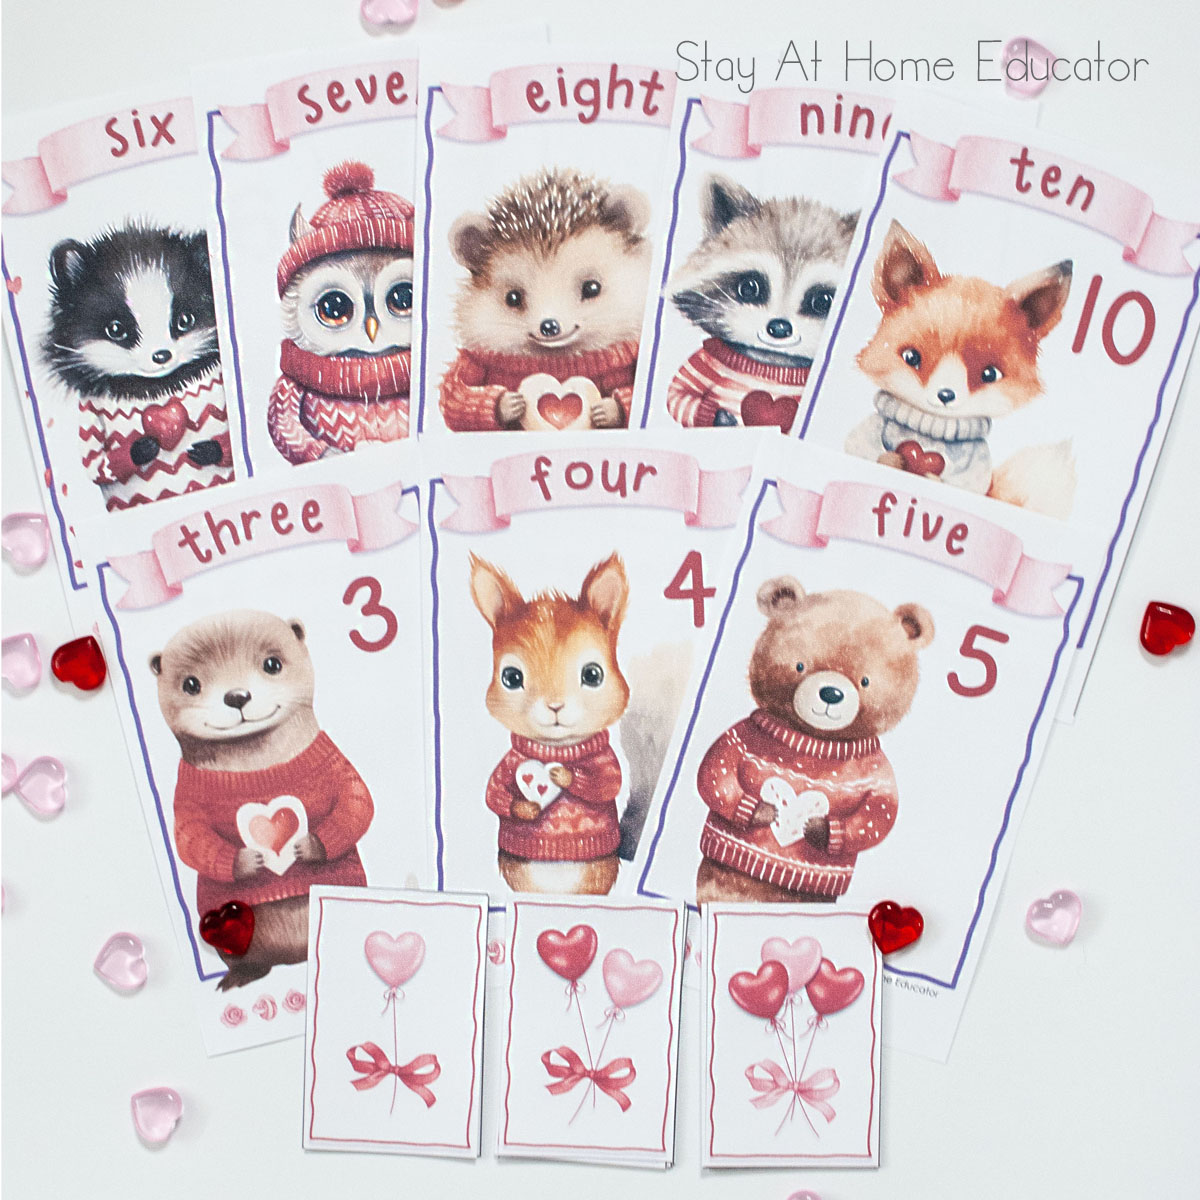 preschool math counting activities for preschool | Valentine's Day counting activity | addition for preschoolers | Valentine's activities for preschoolers | preschool math lesson plan ideas | numbers 3-10 Valentine counting mats along